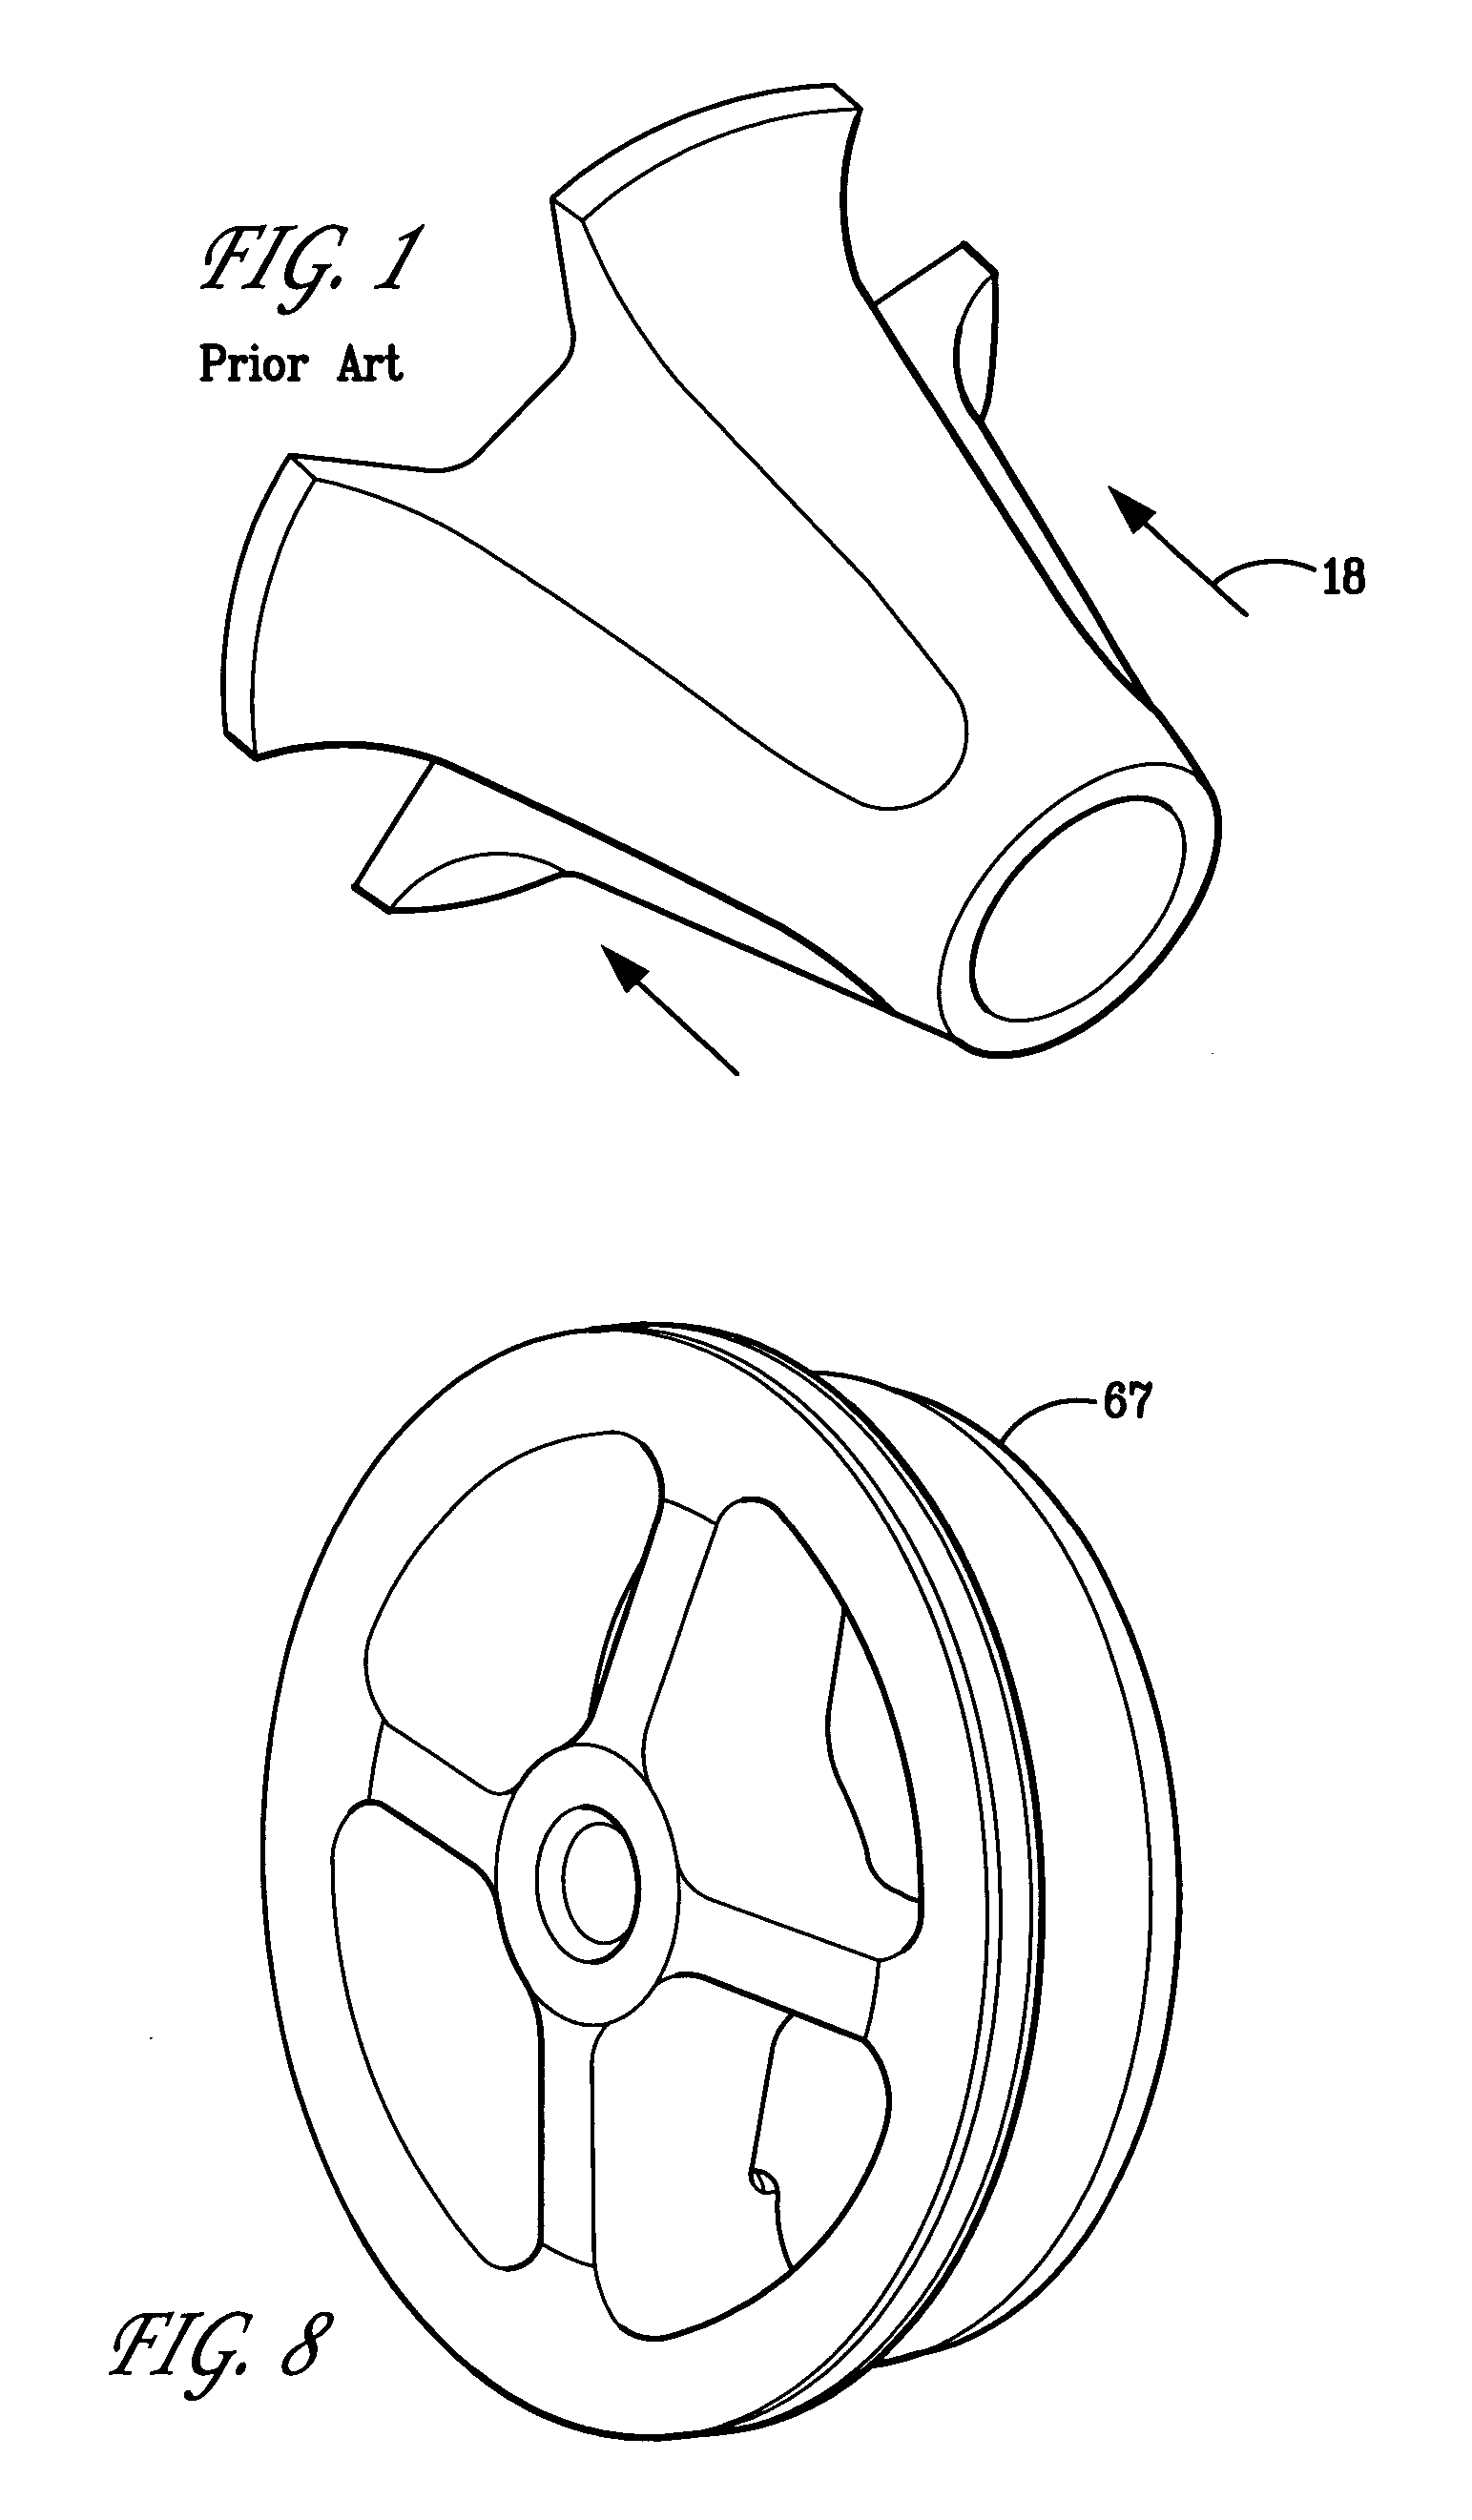 Rotary pulser for transmitting information to the surface from a drill string down hole in a well